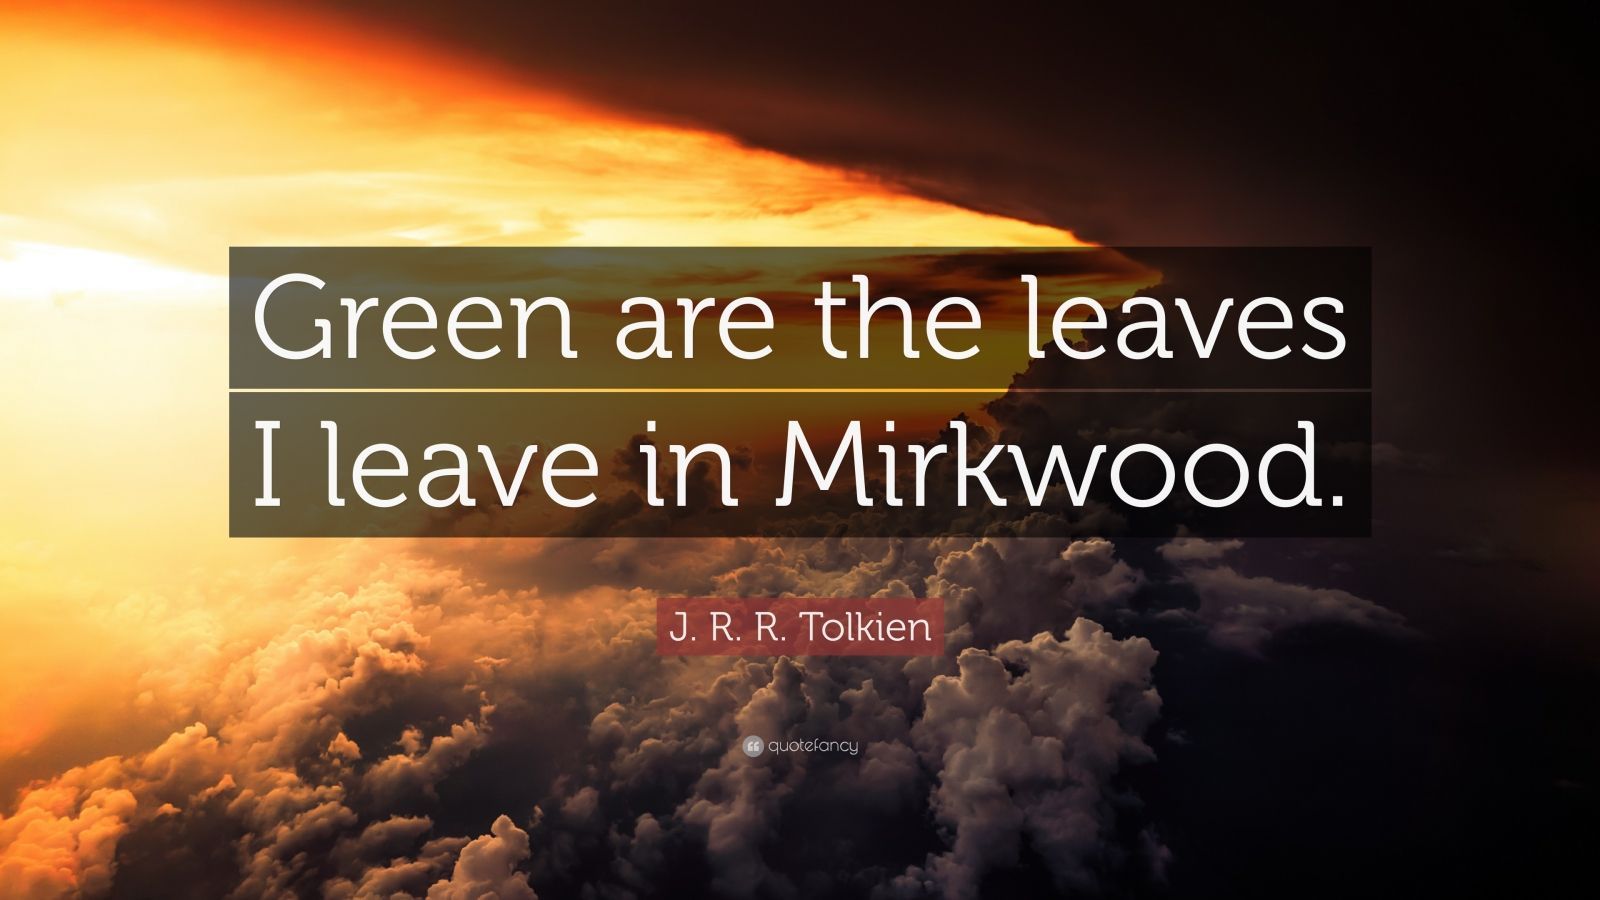 J. R. R. Tolkien Quote: “Green are the leaves I leave in Mirkwood